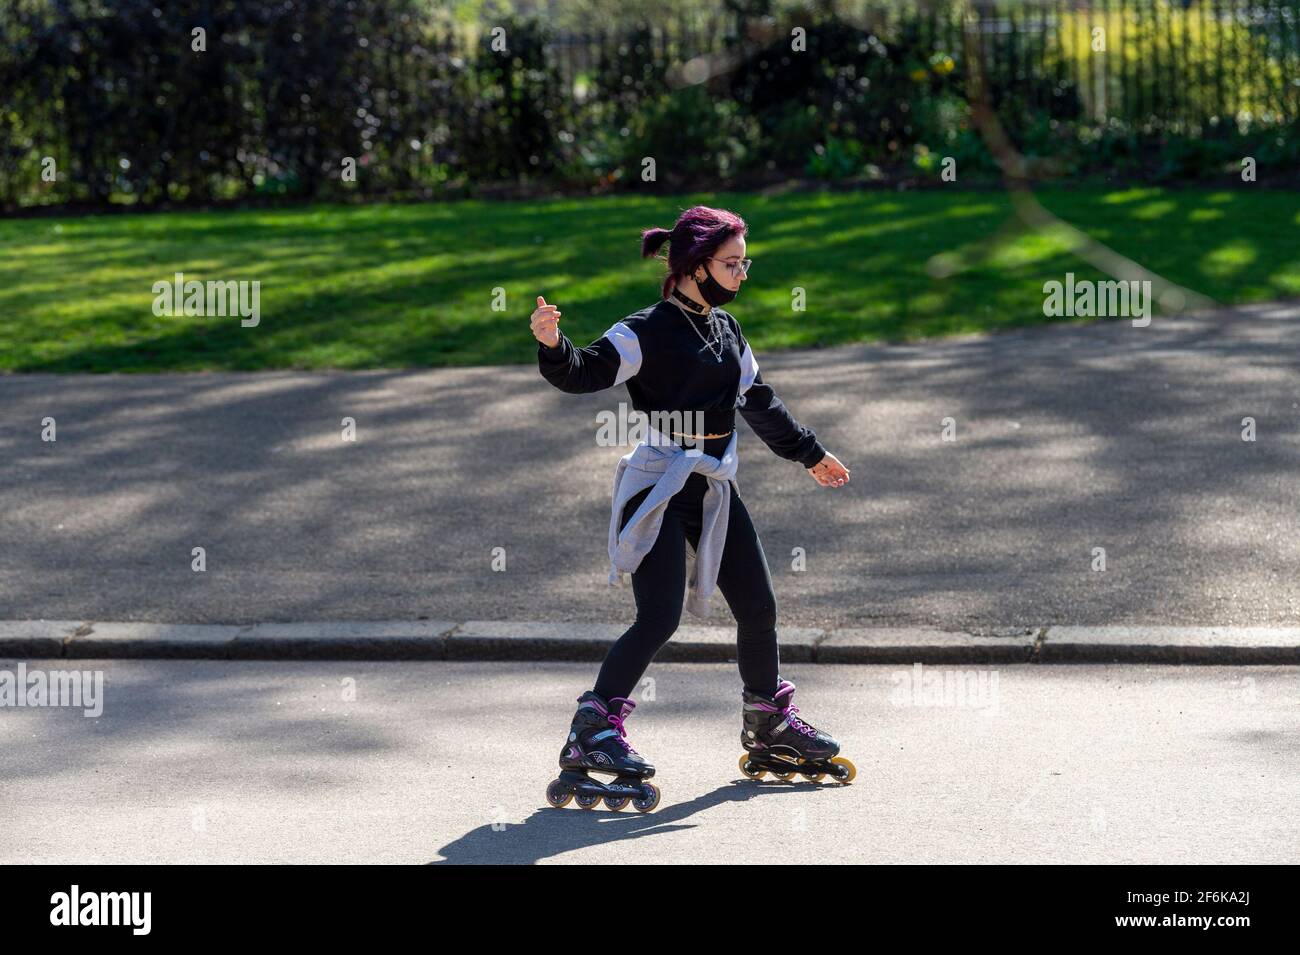 A woman on skates seen in London’s Hyde Park. Stock Photo